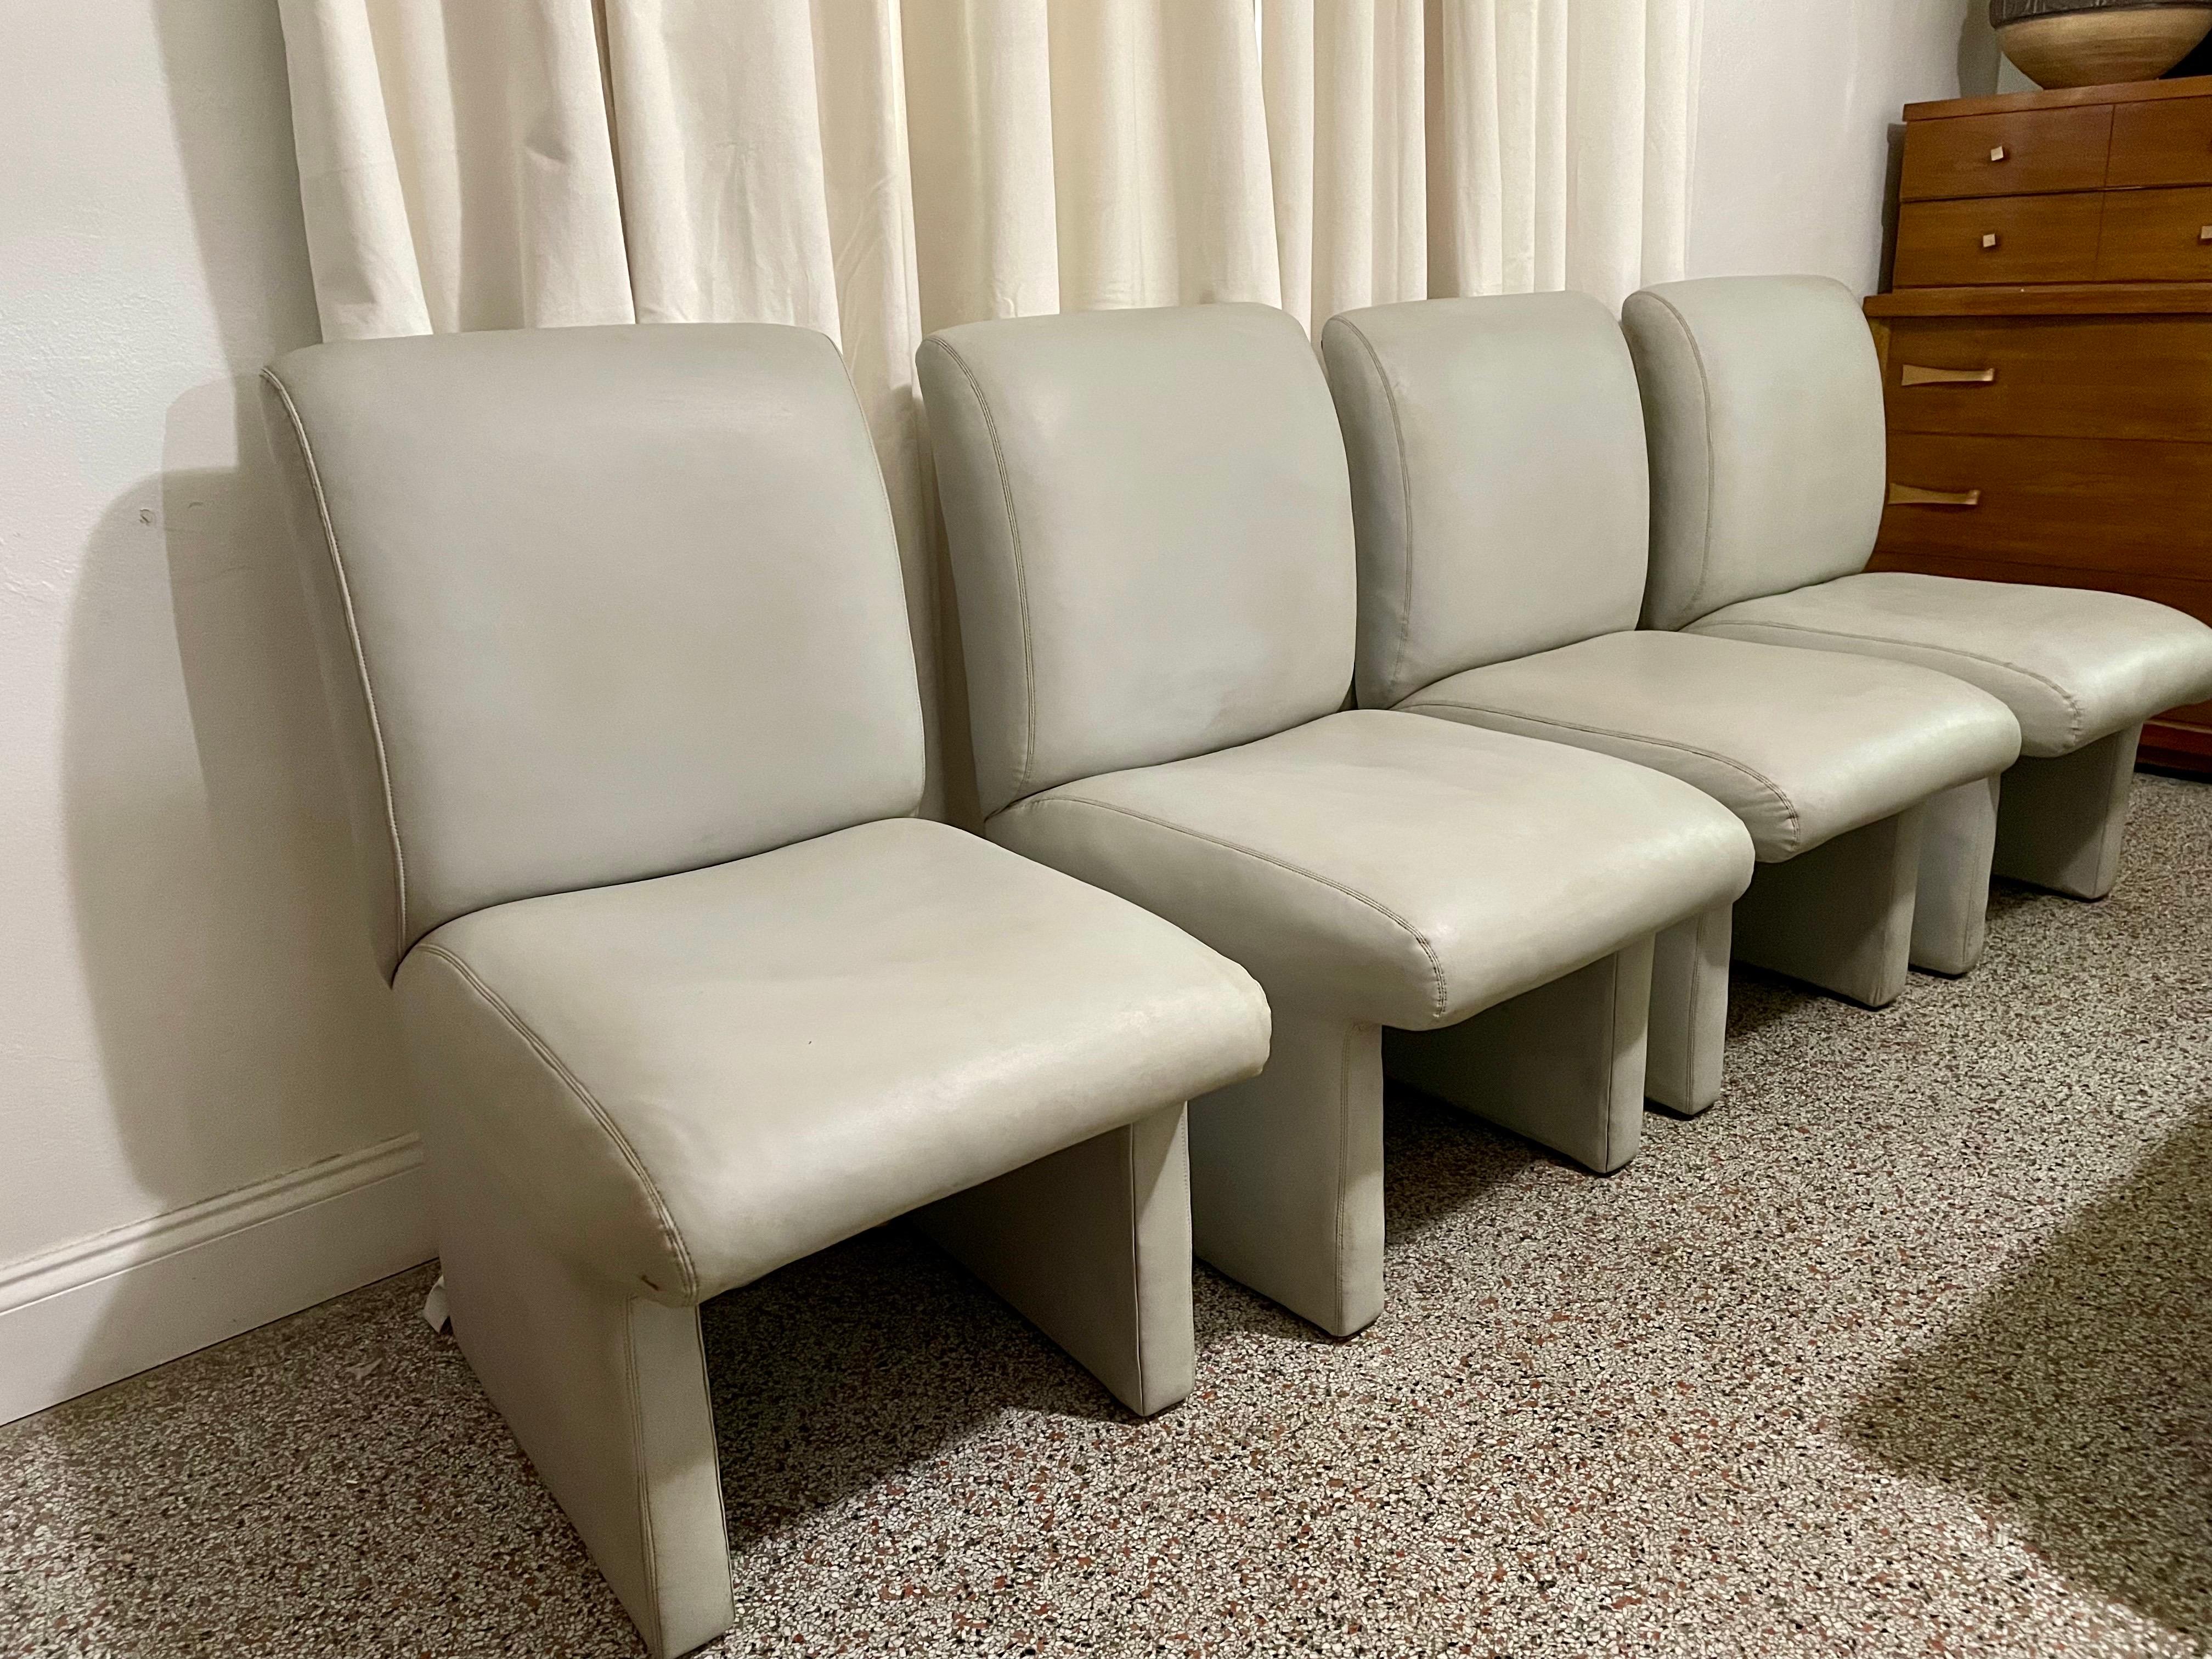 Set of 4 Postmodern Saporiti Italia Style Gray Leather Dining Chairs. Original upholstery in good vintage condition. Seat gracefully curves over legs to create a floating illusion. Perfect size for large dining or conference table